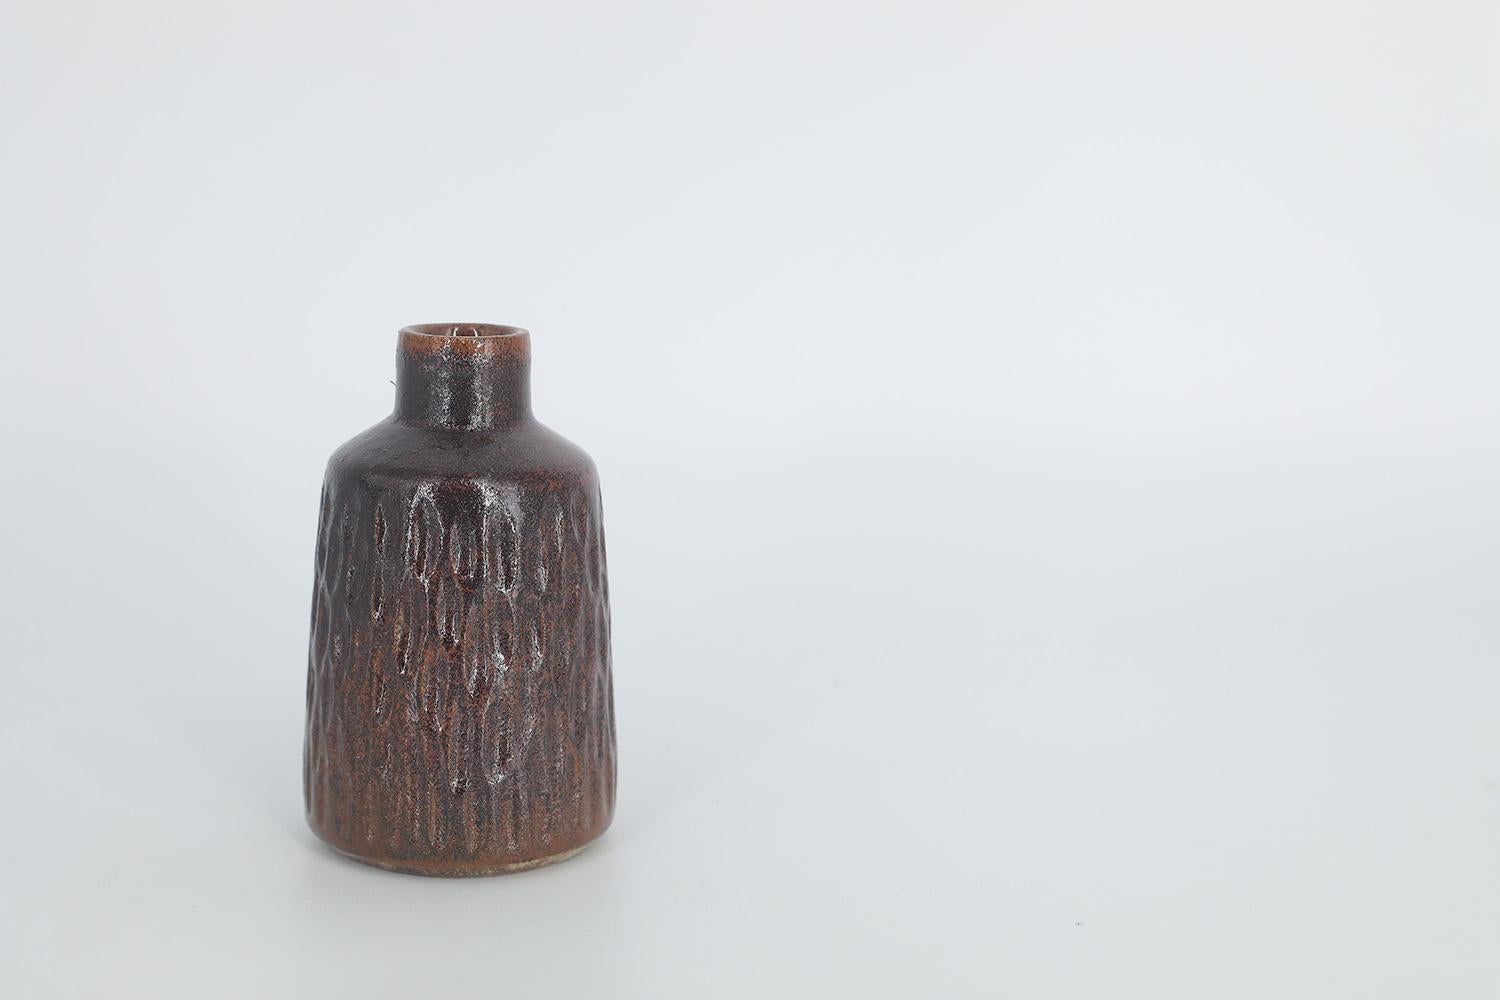 This miniature, collectible stoneware vase was designed by Gunnar Borg for the Swedish manufacture Höganäs Keramik during the 1960s. Handmade by a Master, with the utmost care and attention to details. The vase is dyed brown, with an irregular shade